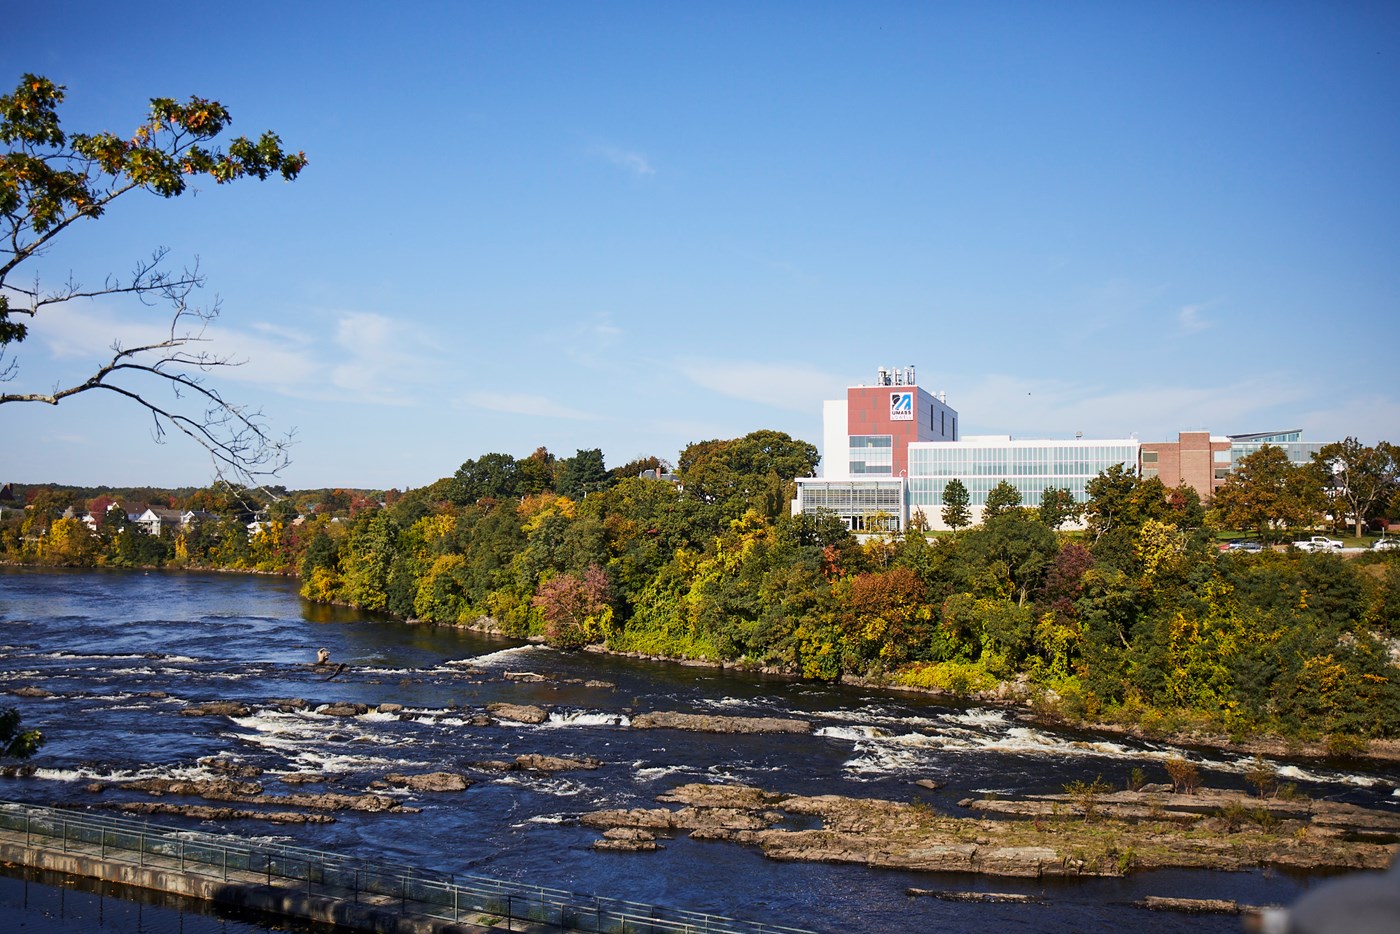 Merrimack River and the Saab Emerging Technology Innovation Center from across the bridge